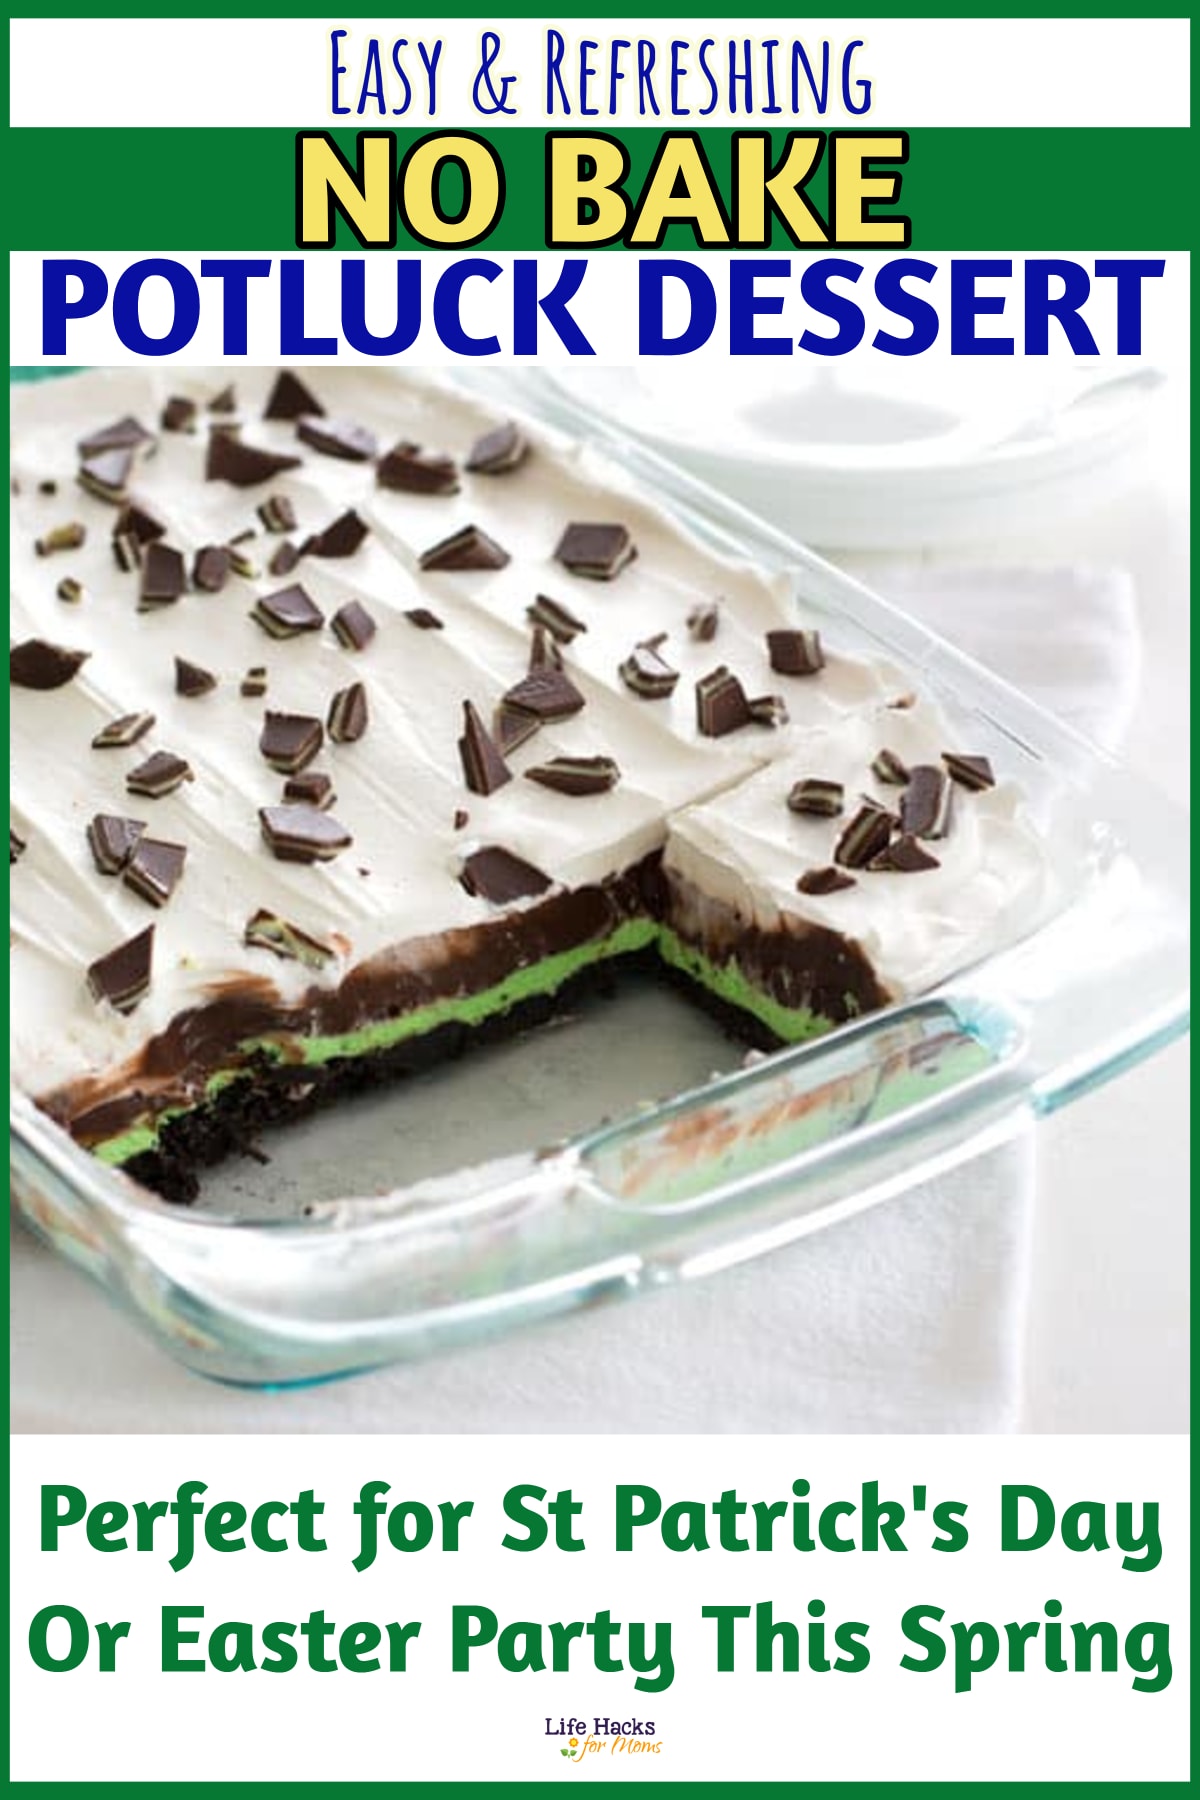 This no bake potluck dessert recipe is so easy and so REFRESHING - perfect for a spring or summer party. I make it for our St Patrick's Day party at work and Wednesday night supper at church. Chocolate, mint and cool whip - so simple!